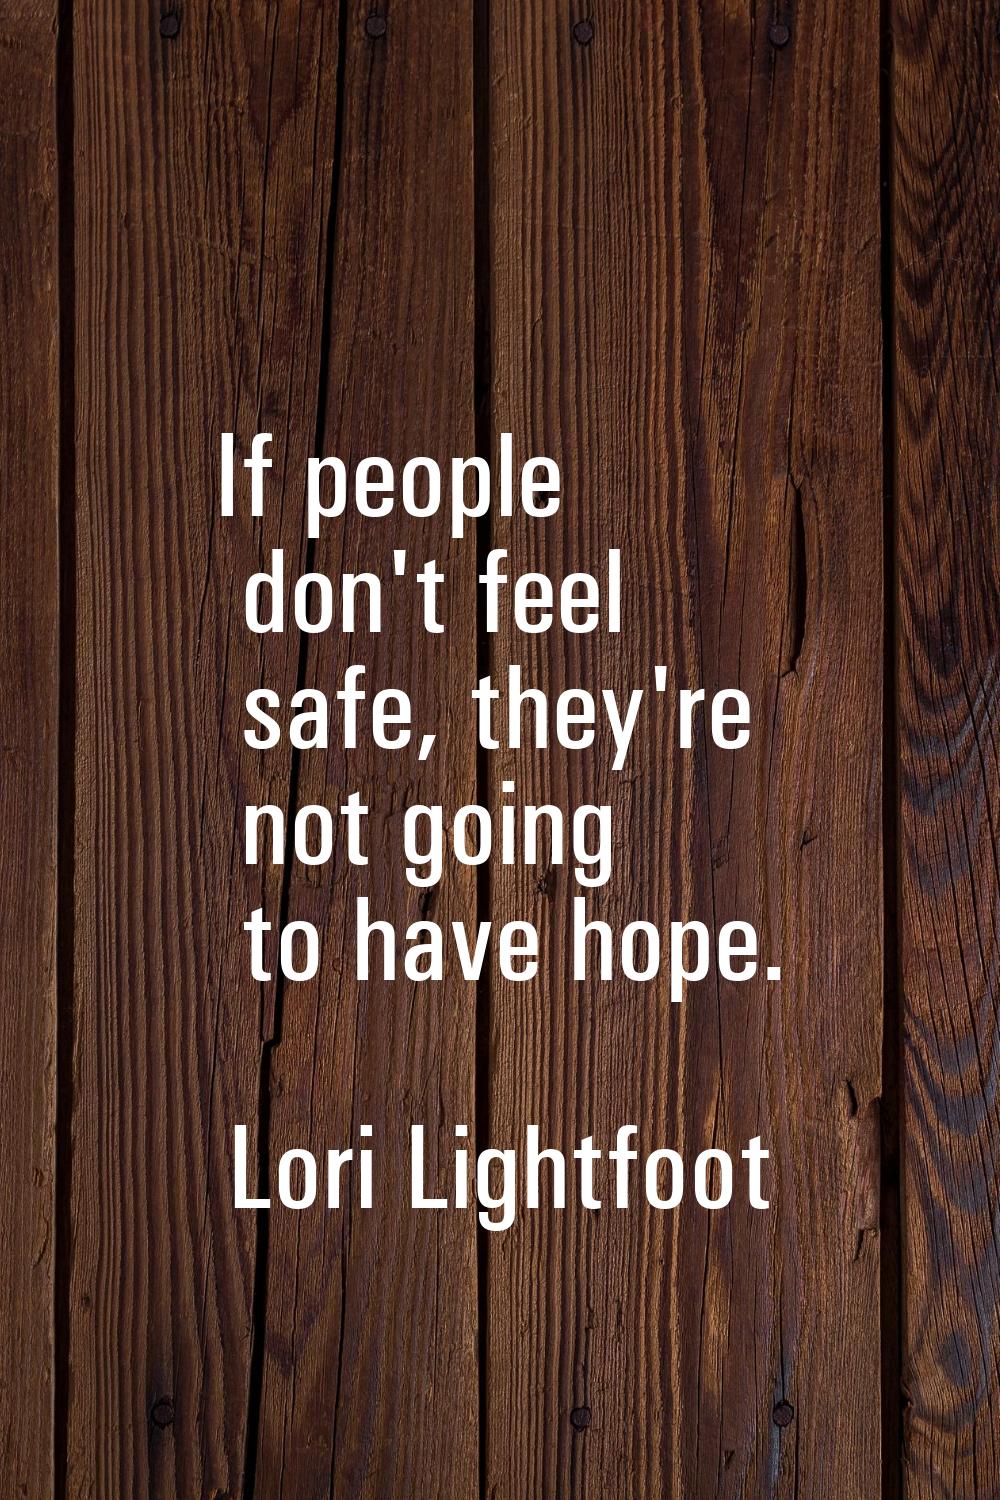 If people don't feel safe, they're not going to have hope.